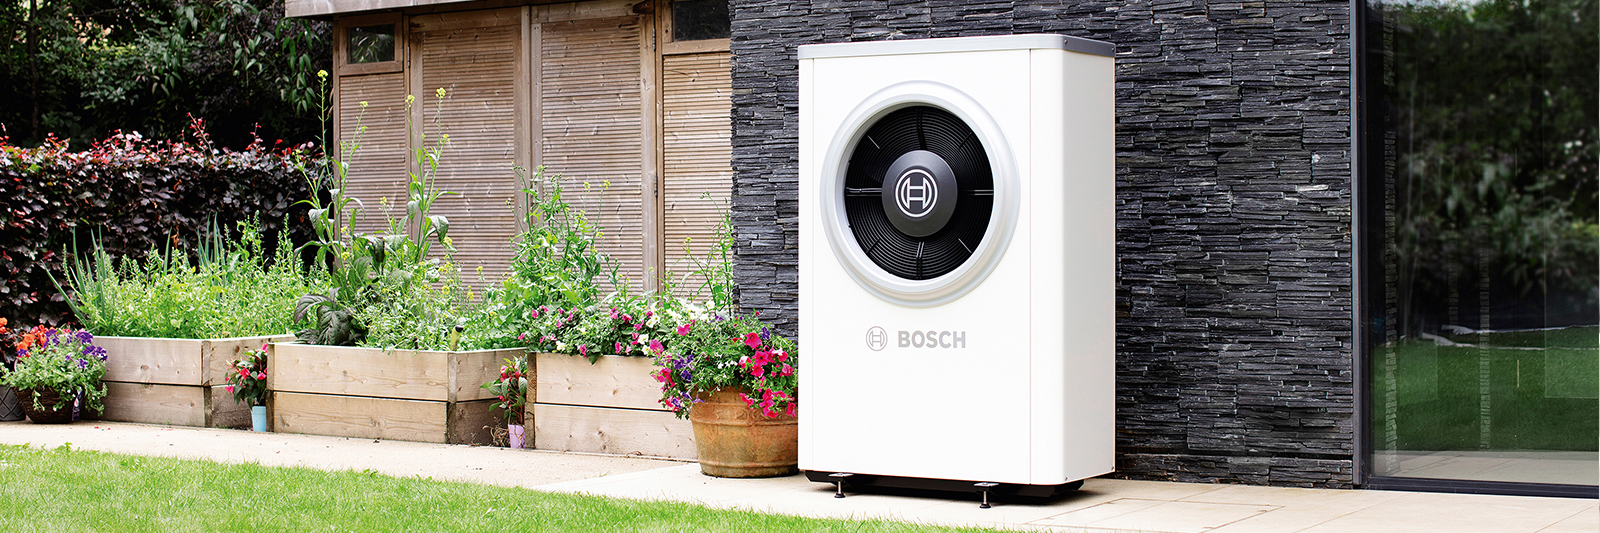 tragedy-notorious-have-a-finger-in-the-pie-bosch-electric-heat-pump